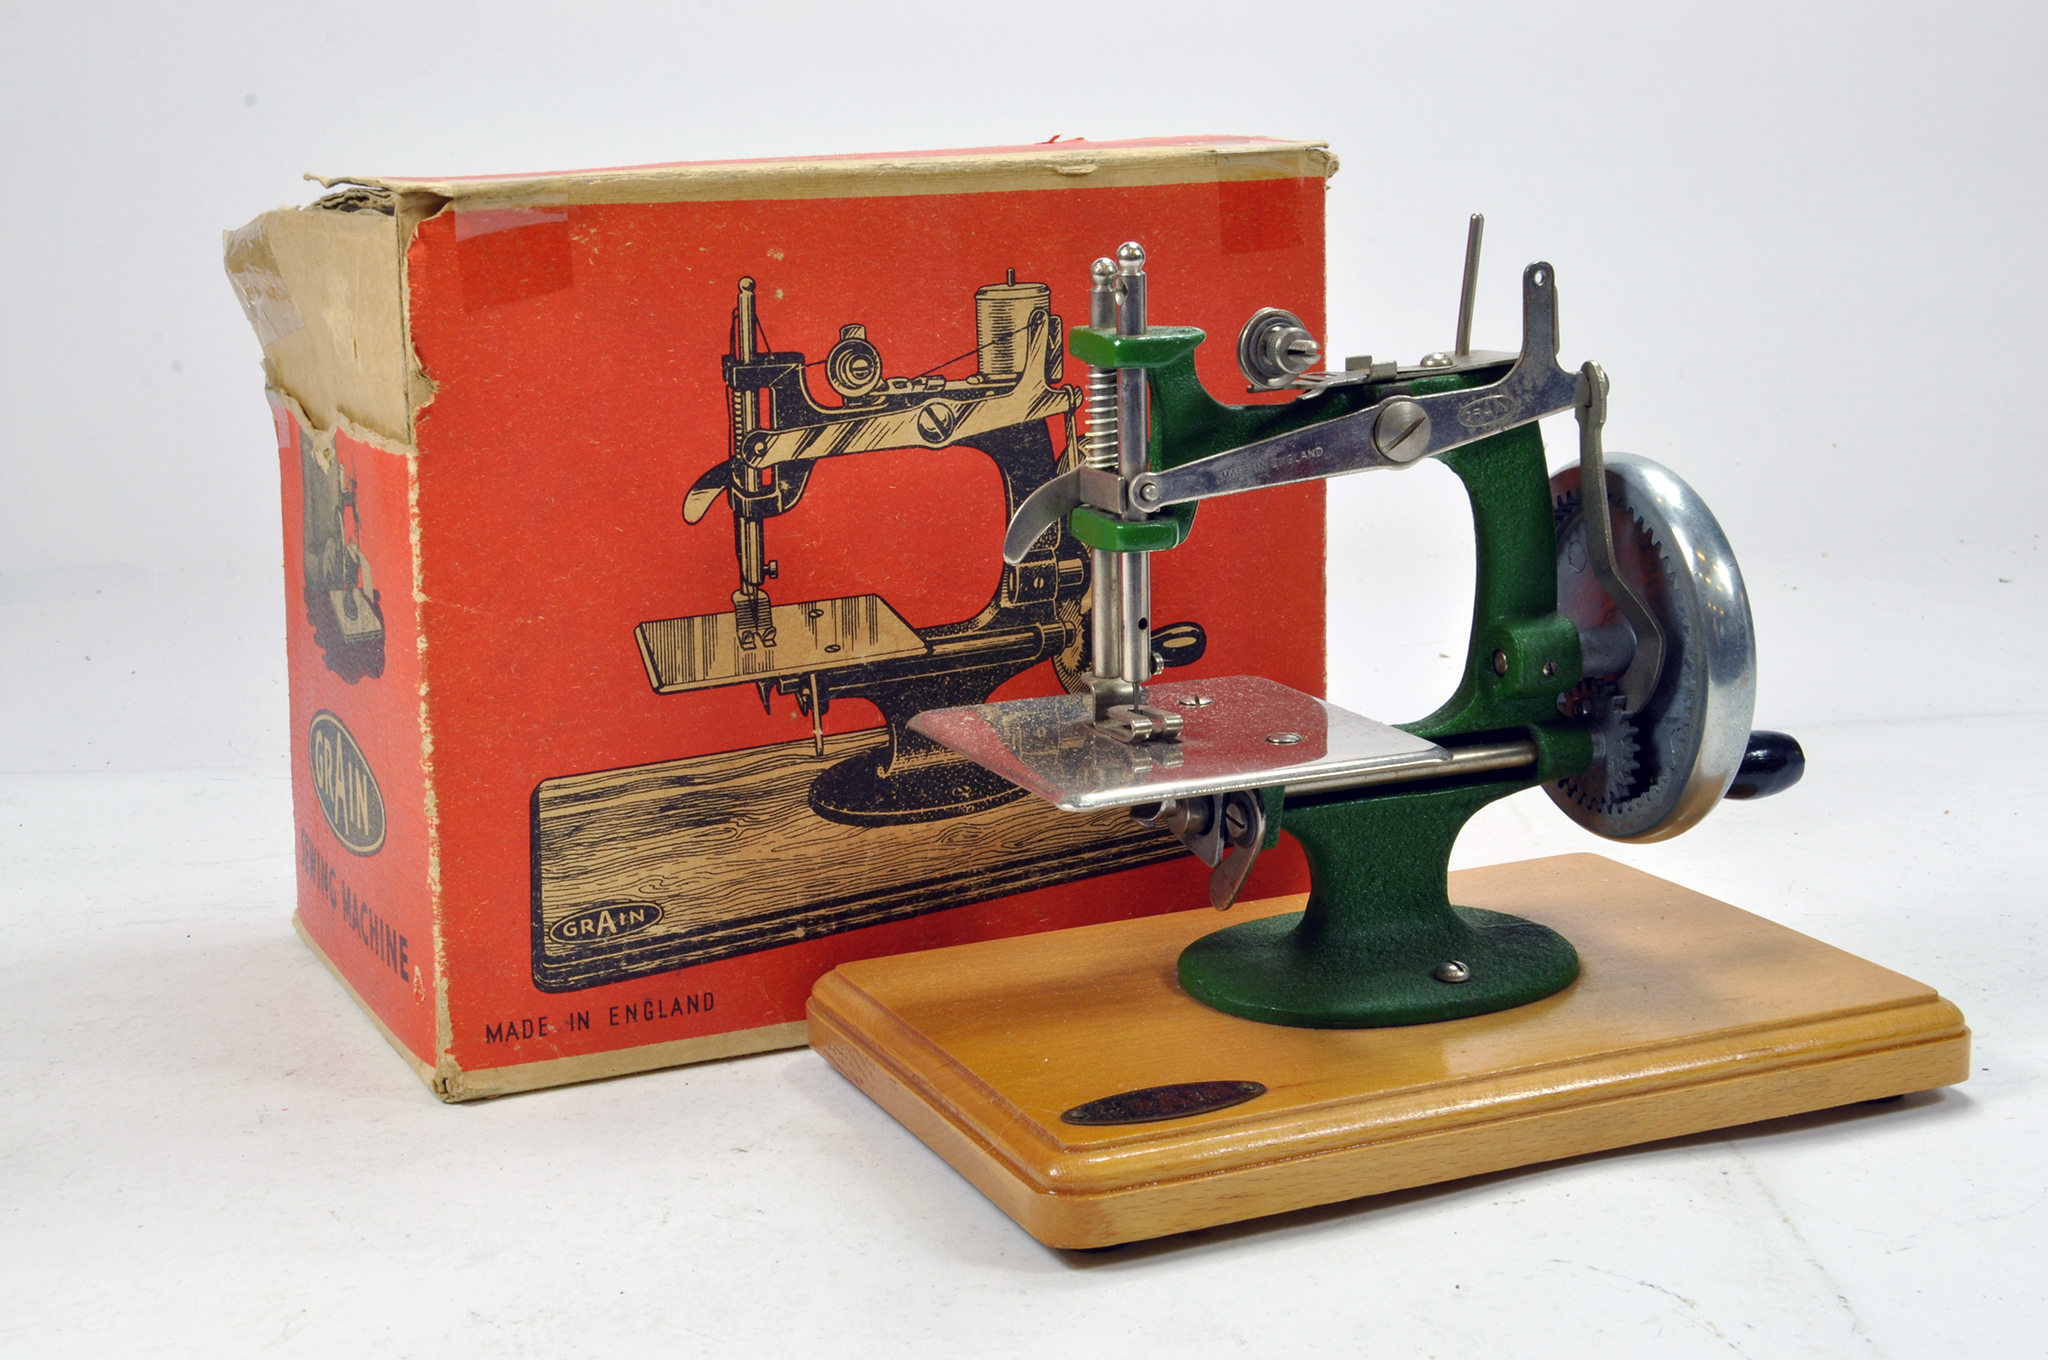 An original GRAIN of England Sewing Machine with Box. Untested but displays well.